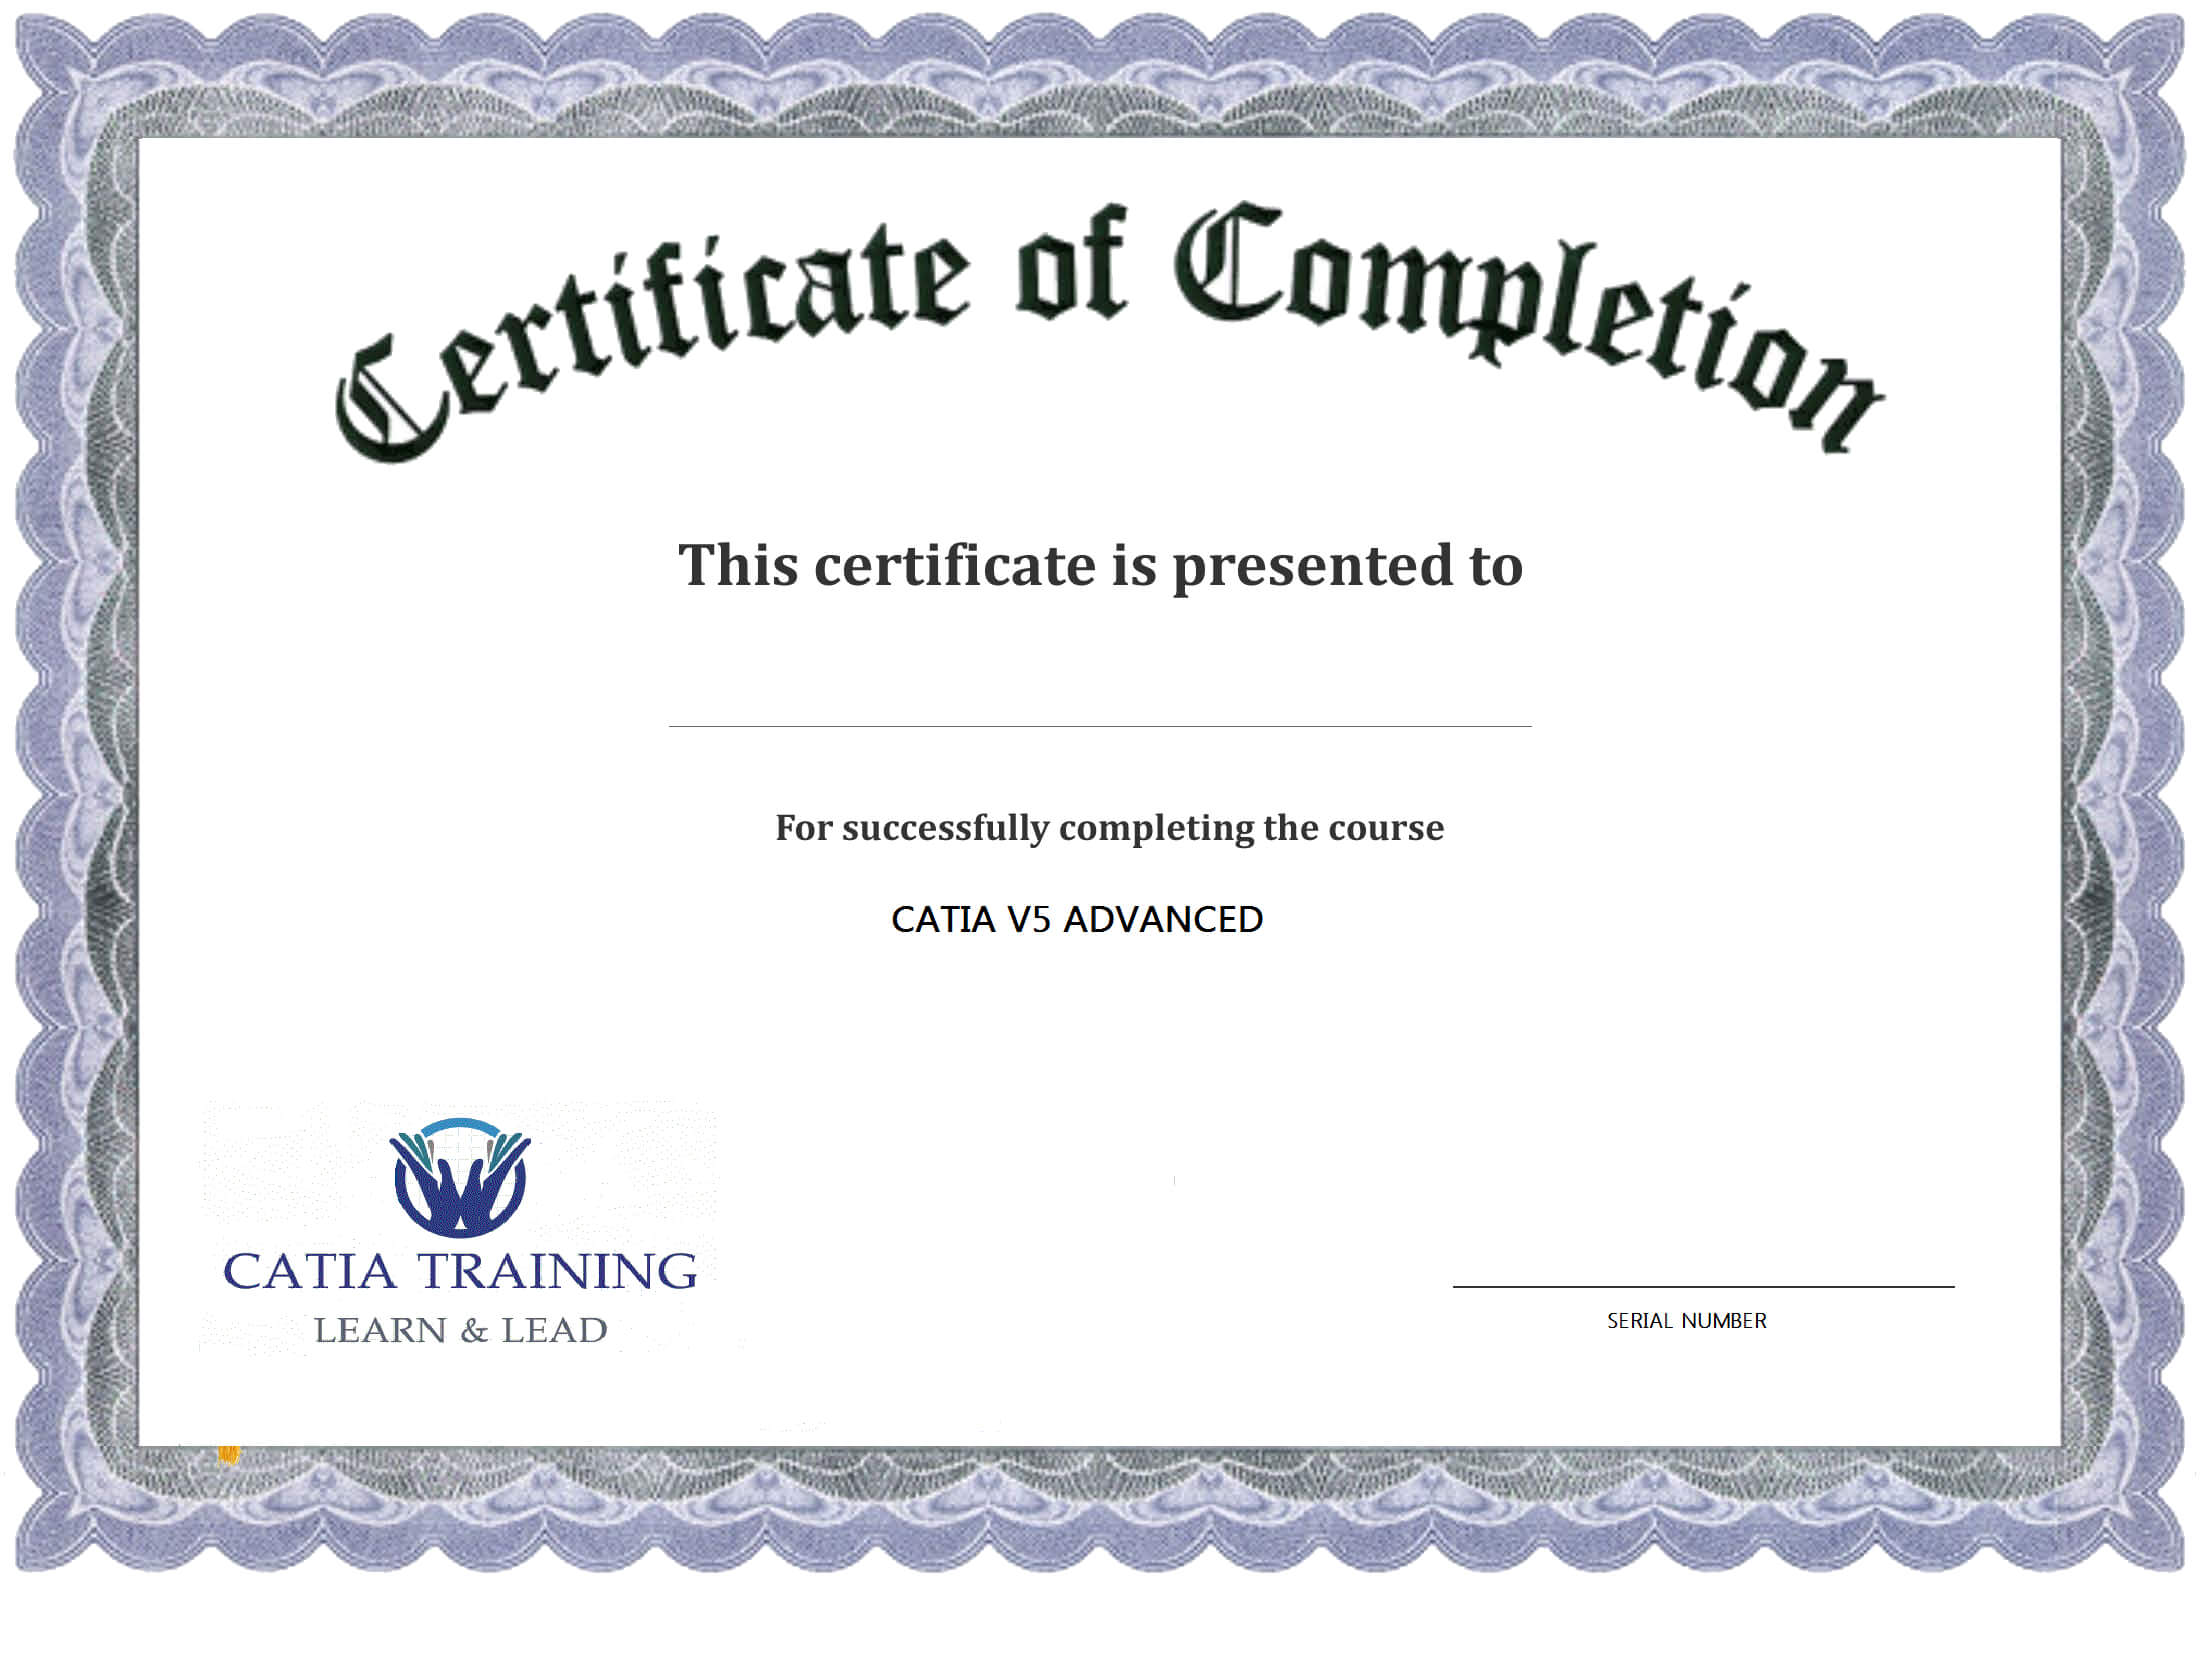 10 Certificate Of Completion Templates Free Download Images For Blank Certificate Templates Free Download